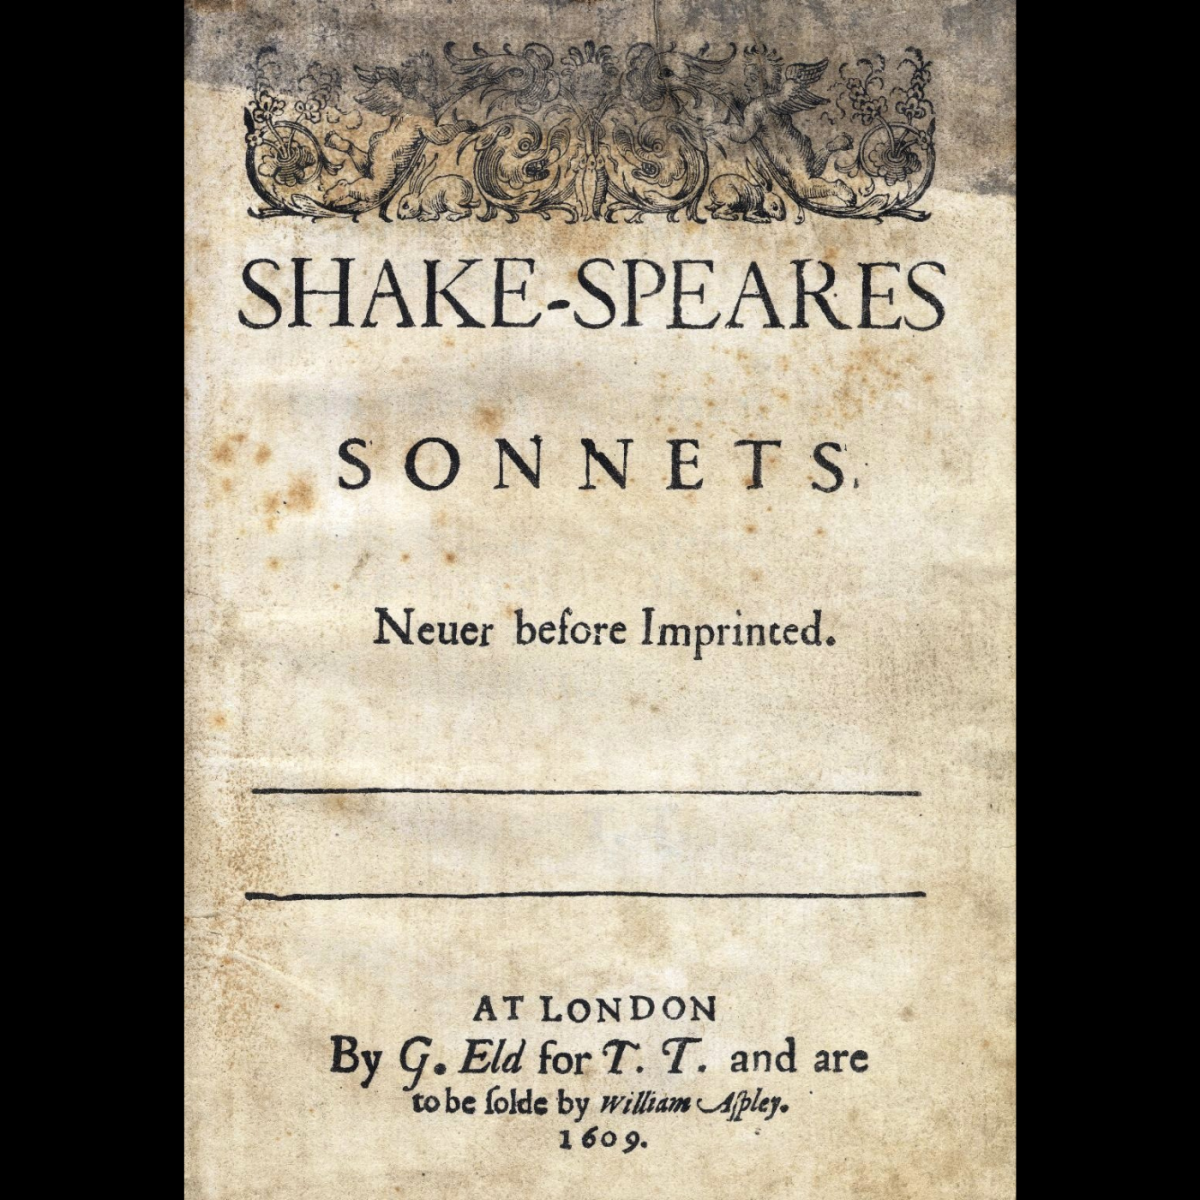 This is a scan of the original title page of "Shakespeare's Sonnets" (1609).